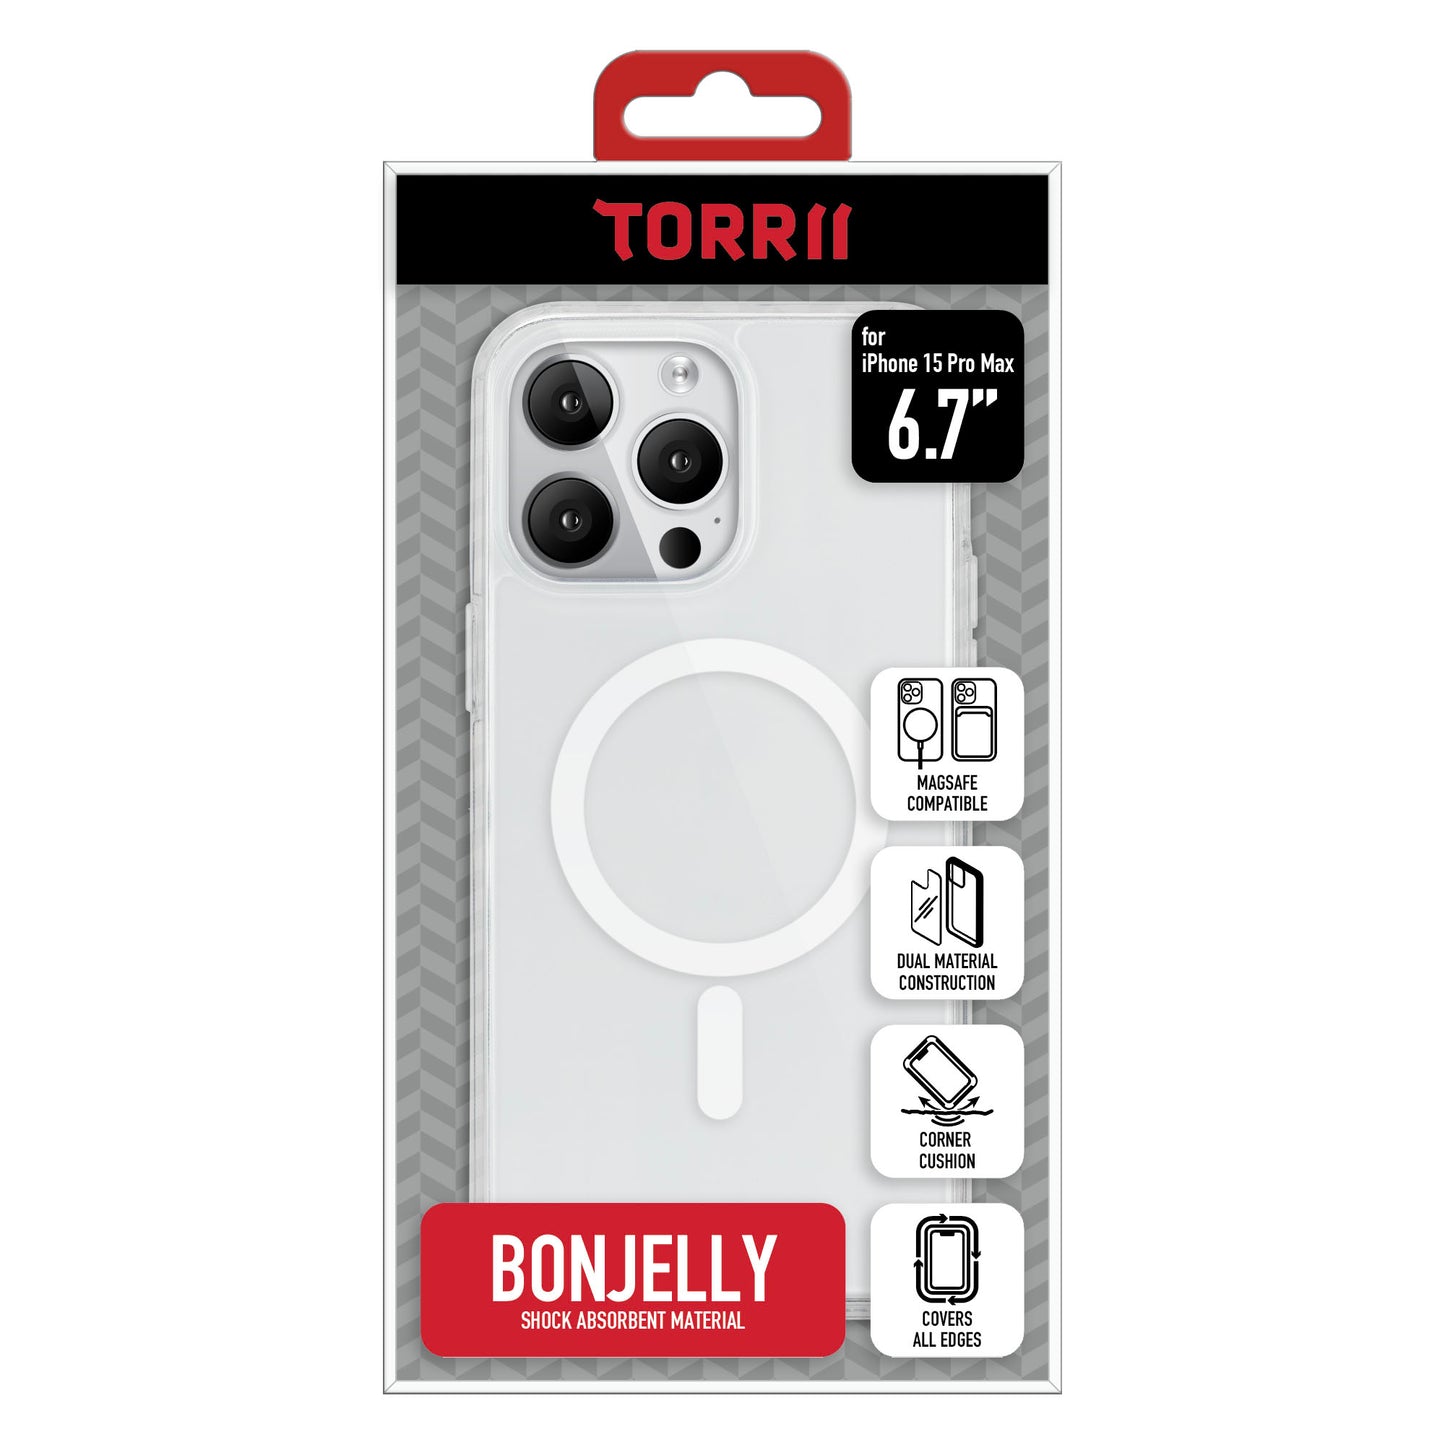 Torrii BonJelly 手機軟殼 for iPhone 15 Pro Max (MagSafe 透明)